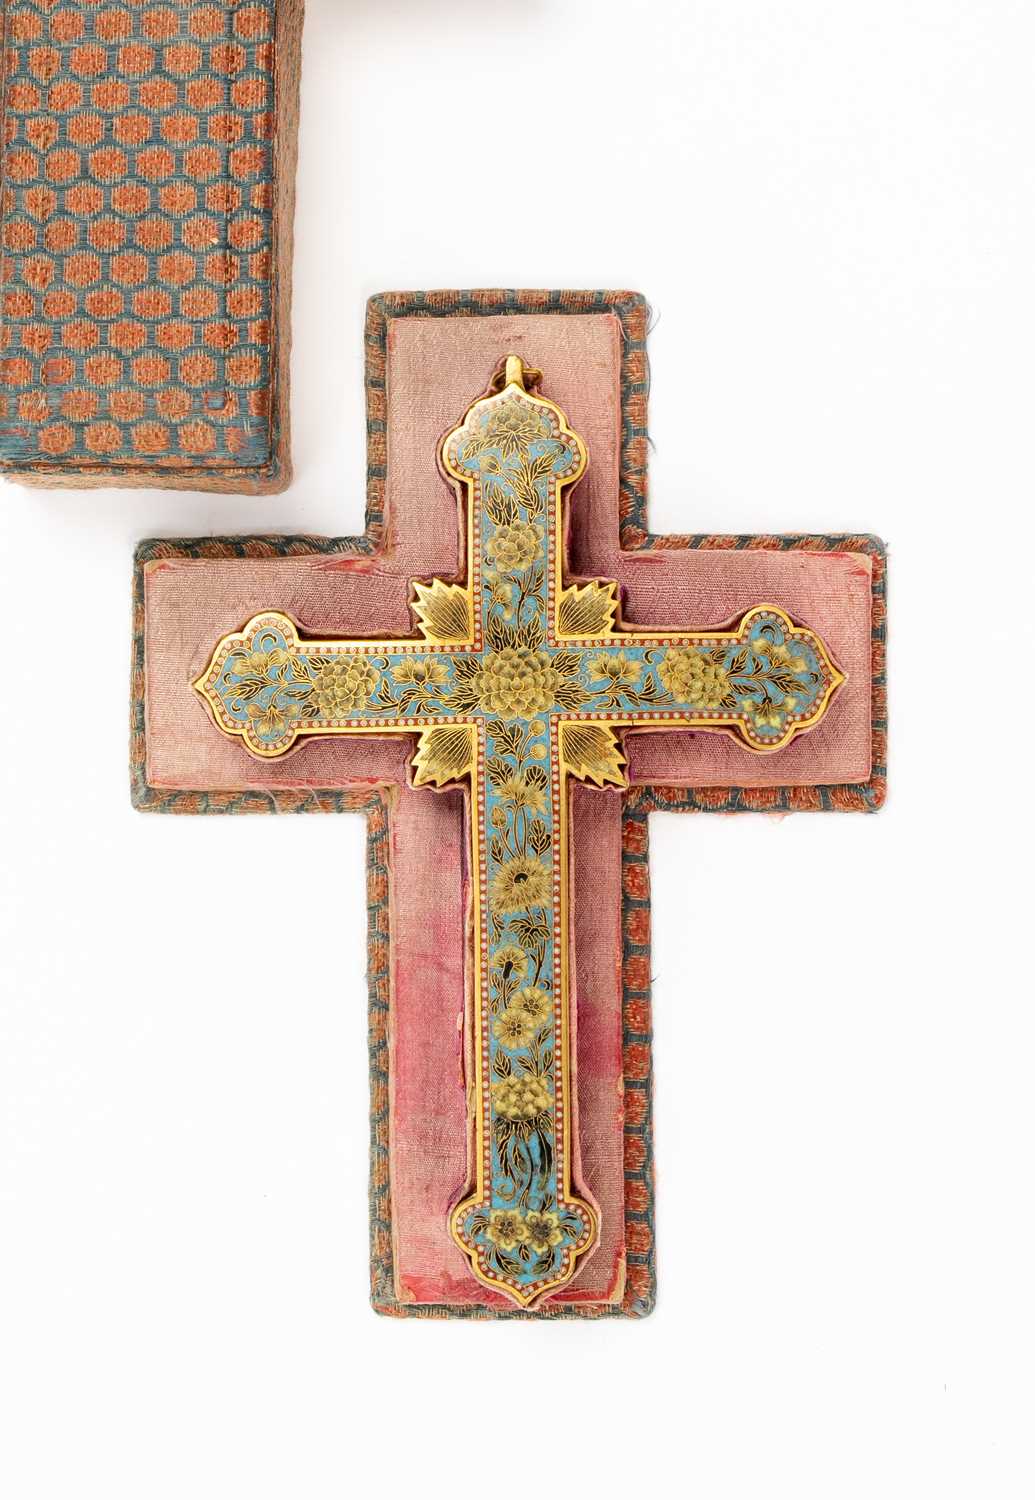 A RARE CHINESE CLOISONNE ENAMEL CRUCIFIX19TH CENTURYDecorated to one side with leafy blossoming